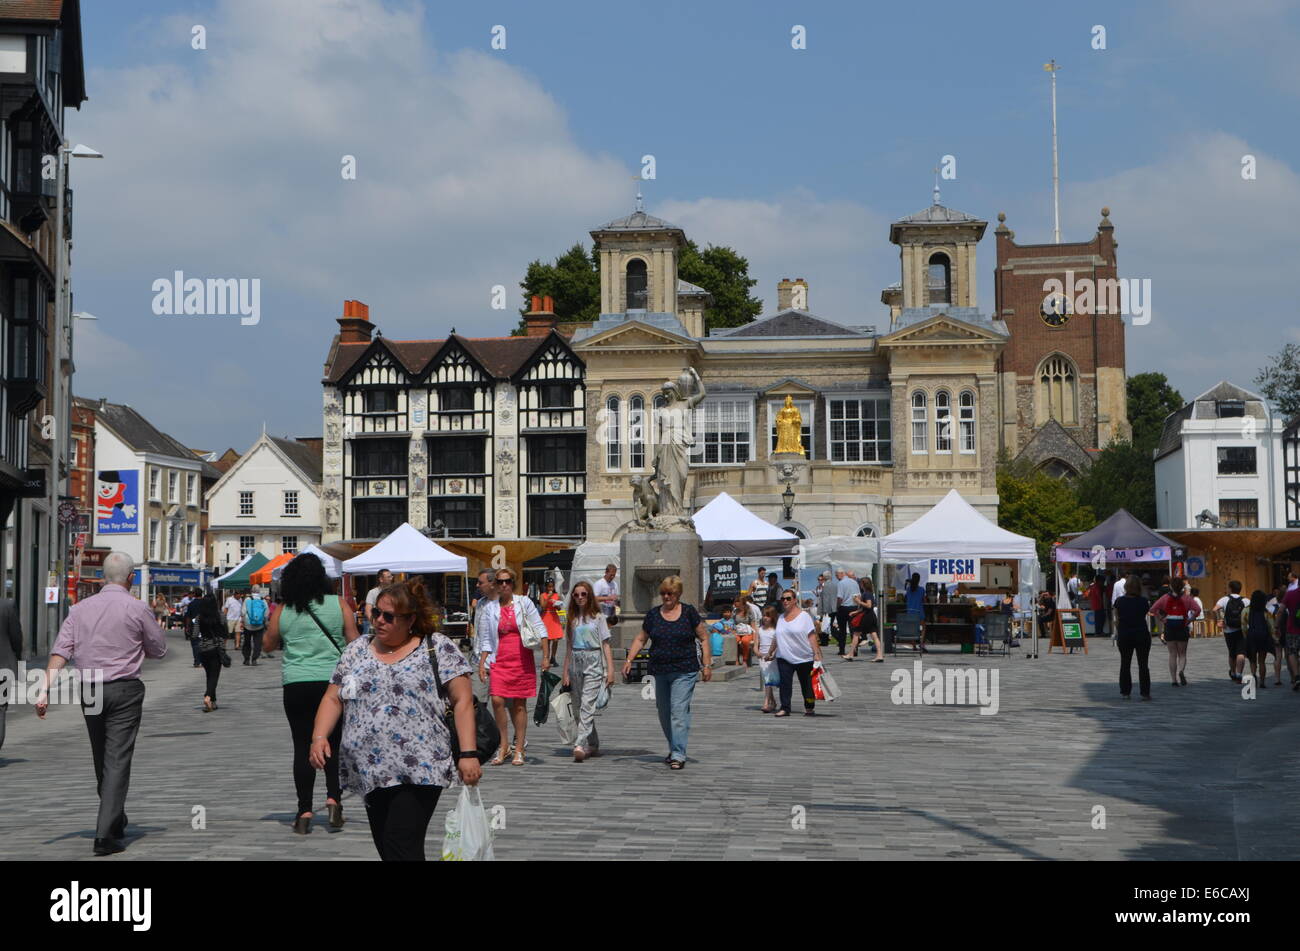 RoyalBorough KingstononThames marketplace with its ancient buildings and street marketeers gets ready for aday of selling&buying Stock Photo